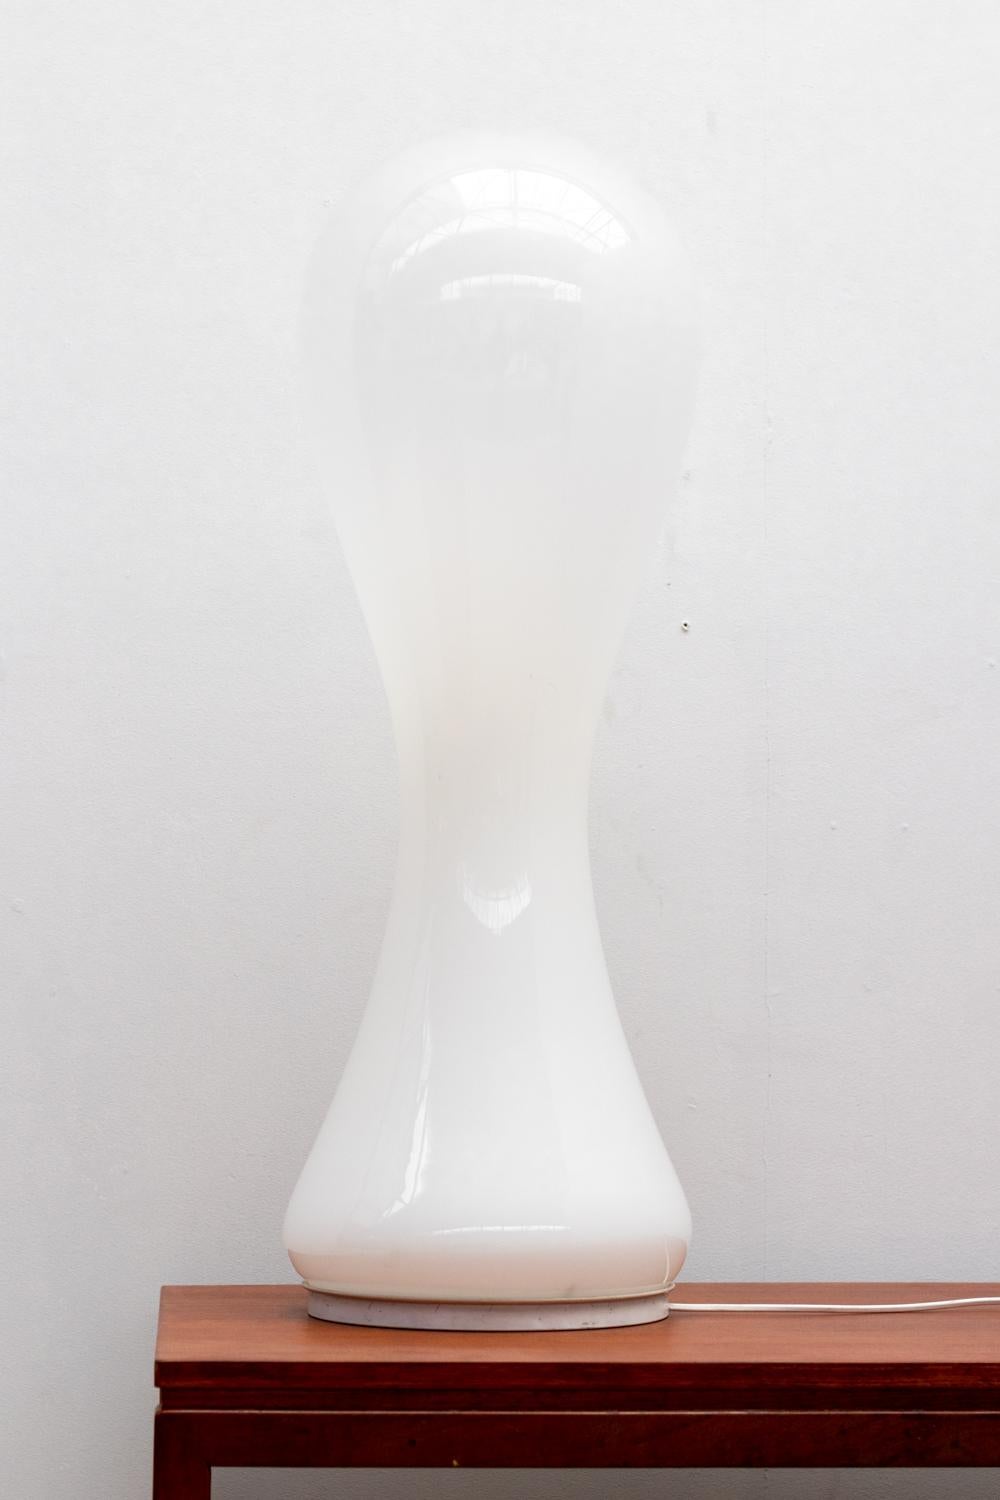 The opaline glass lamp, inspired by Italian designer Nason's style, takes the shape of a drop and sits upon a metal base. The milky glass gently curves, diffusing light softly when illuminated.

Do not hesitate to contact us for any additional